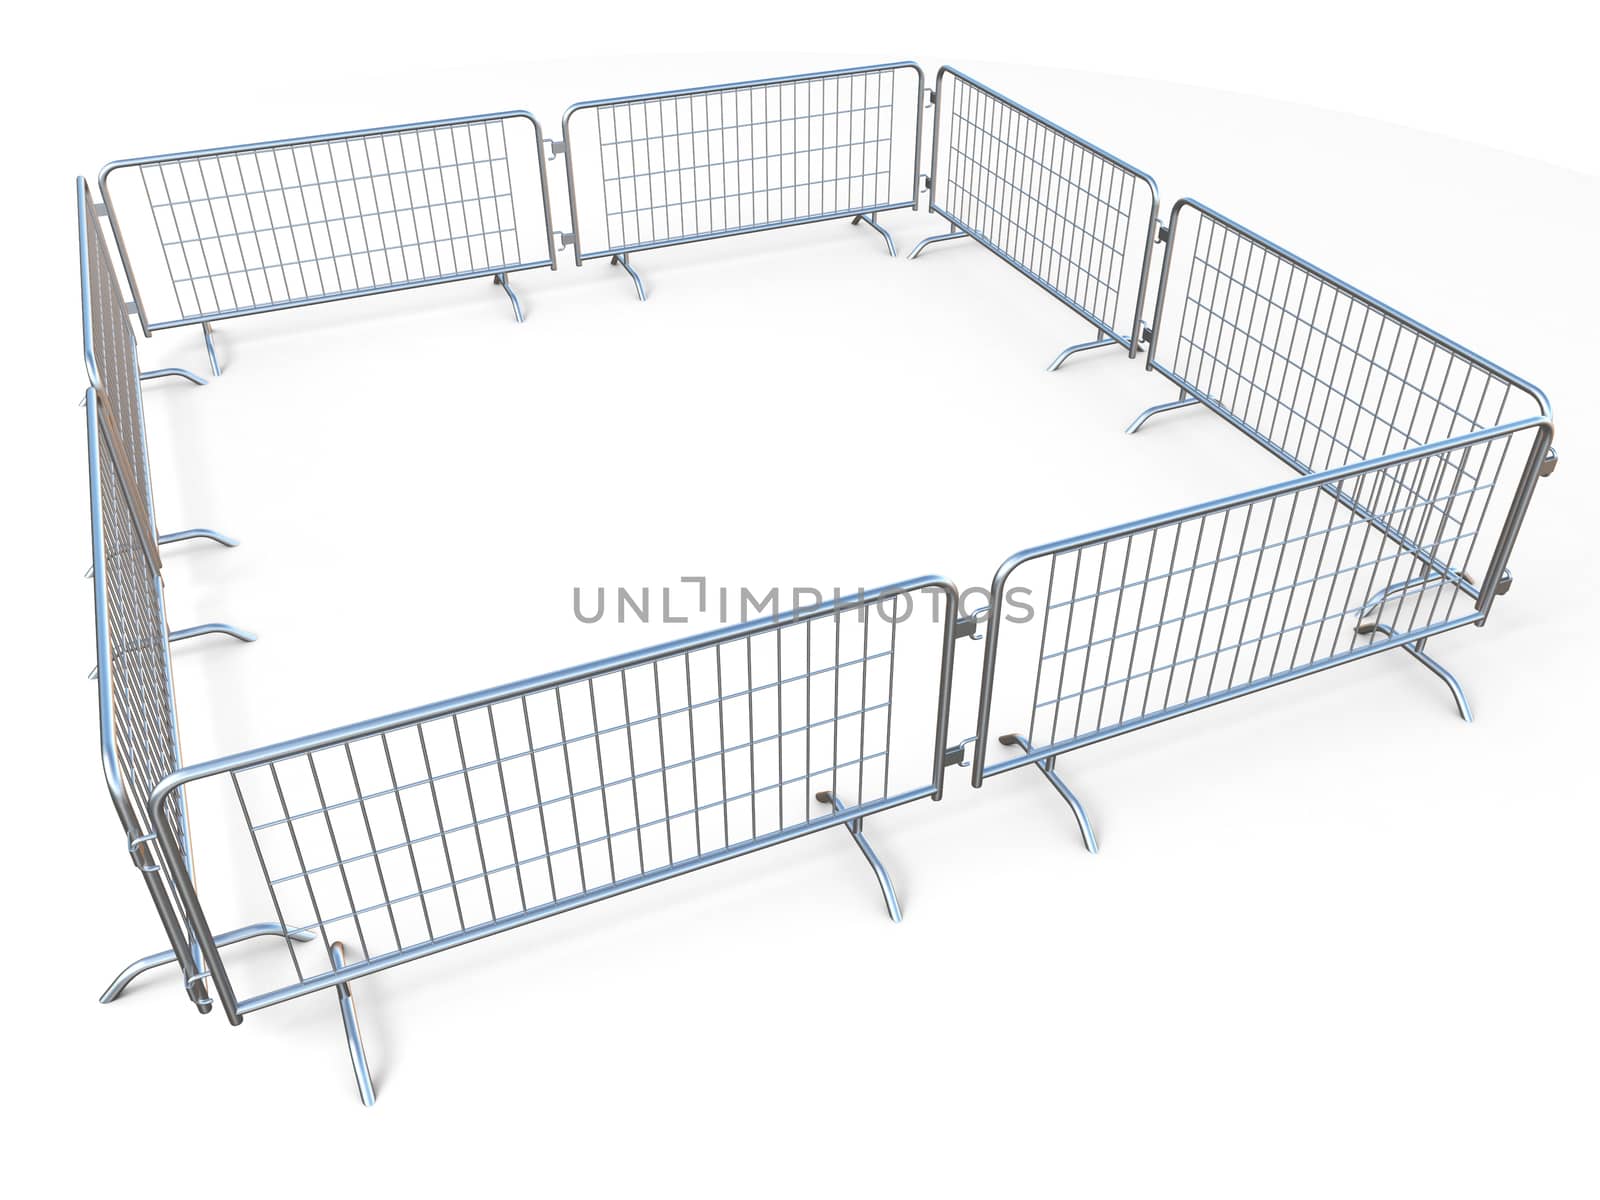 Barricaded square made of mobile steel fences 3D render illustration isolated on white background